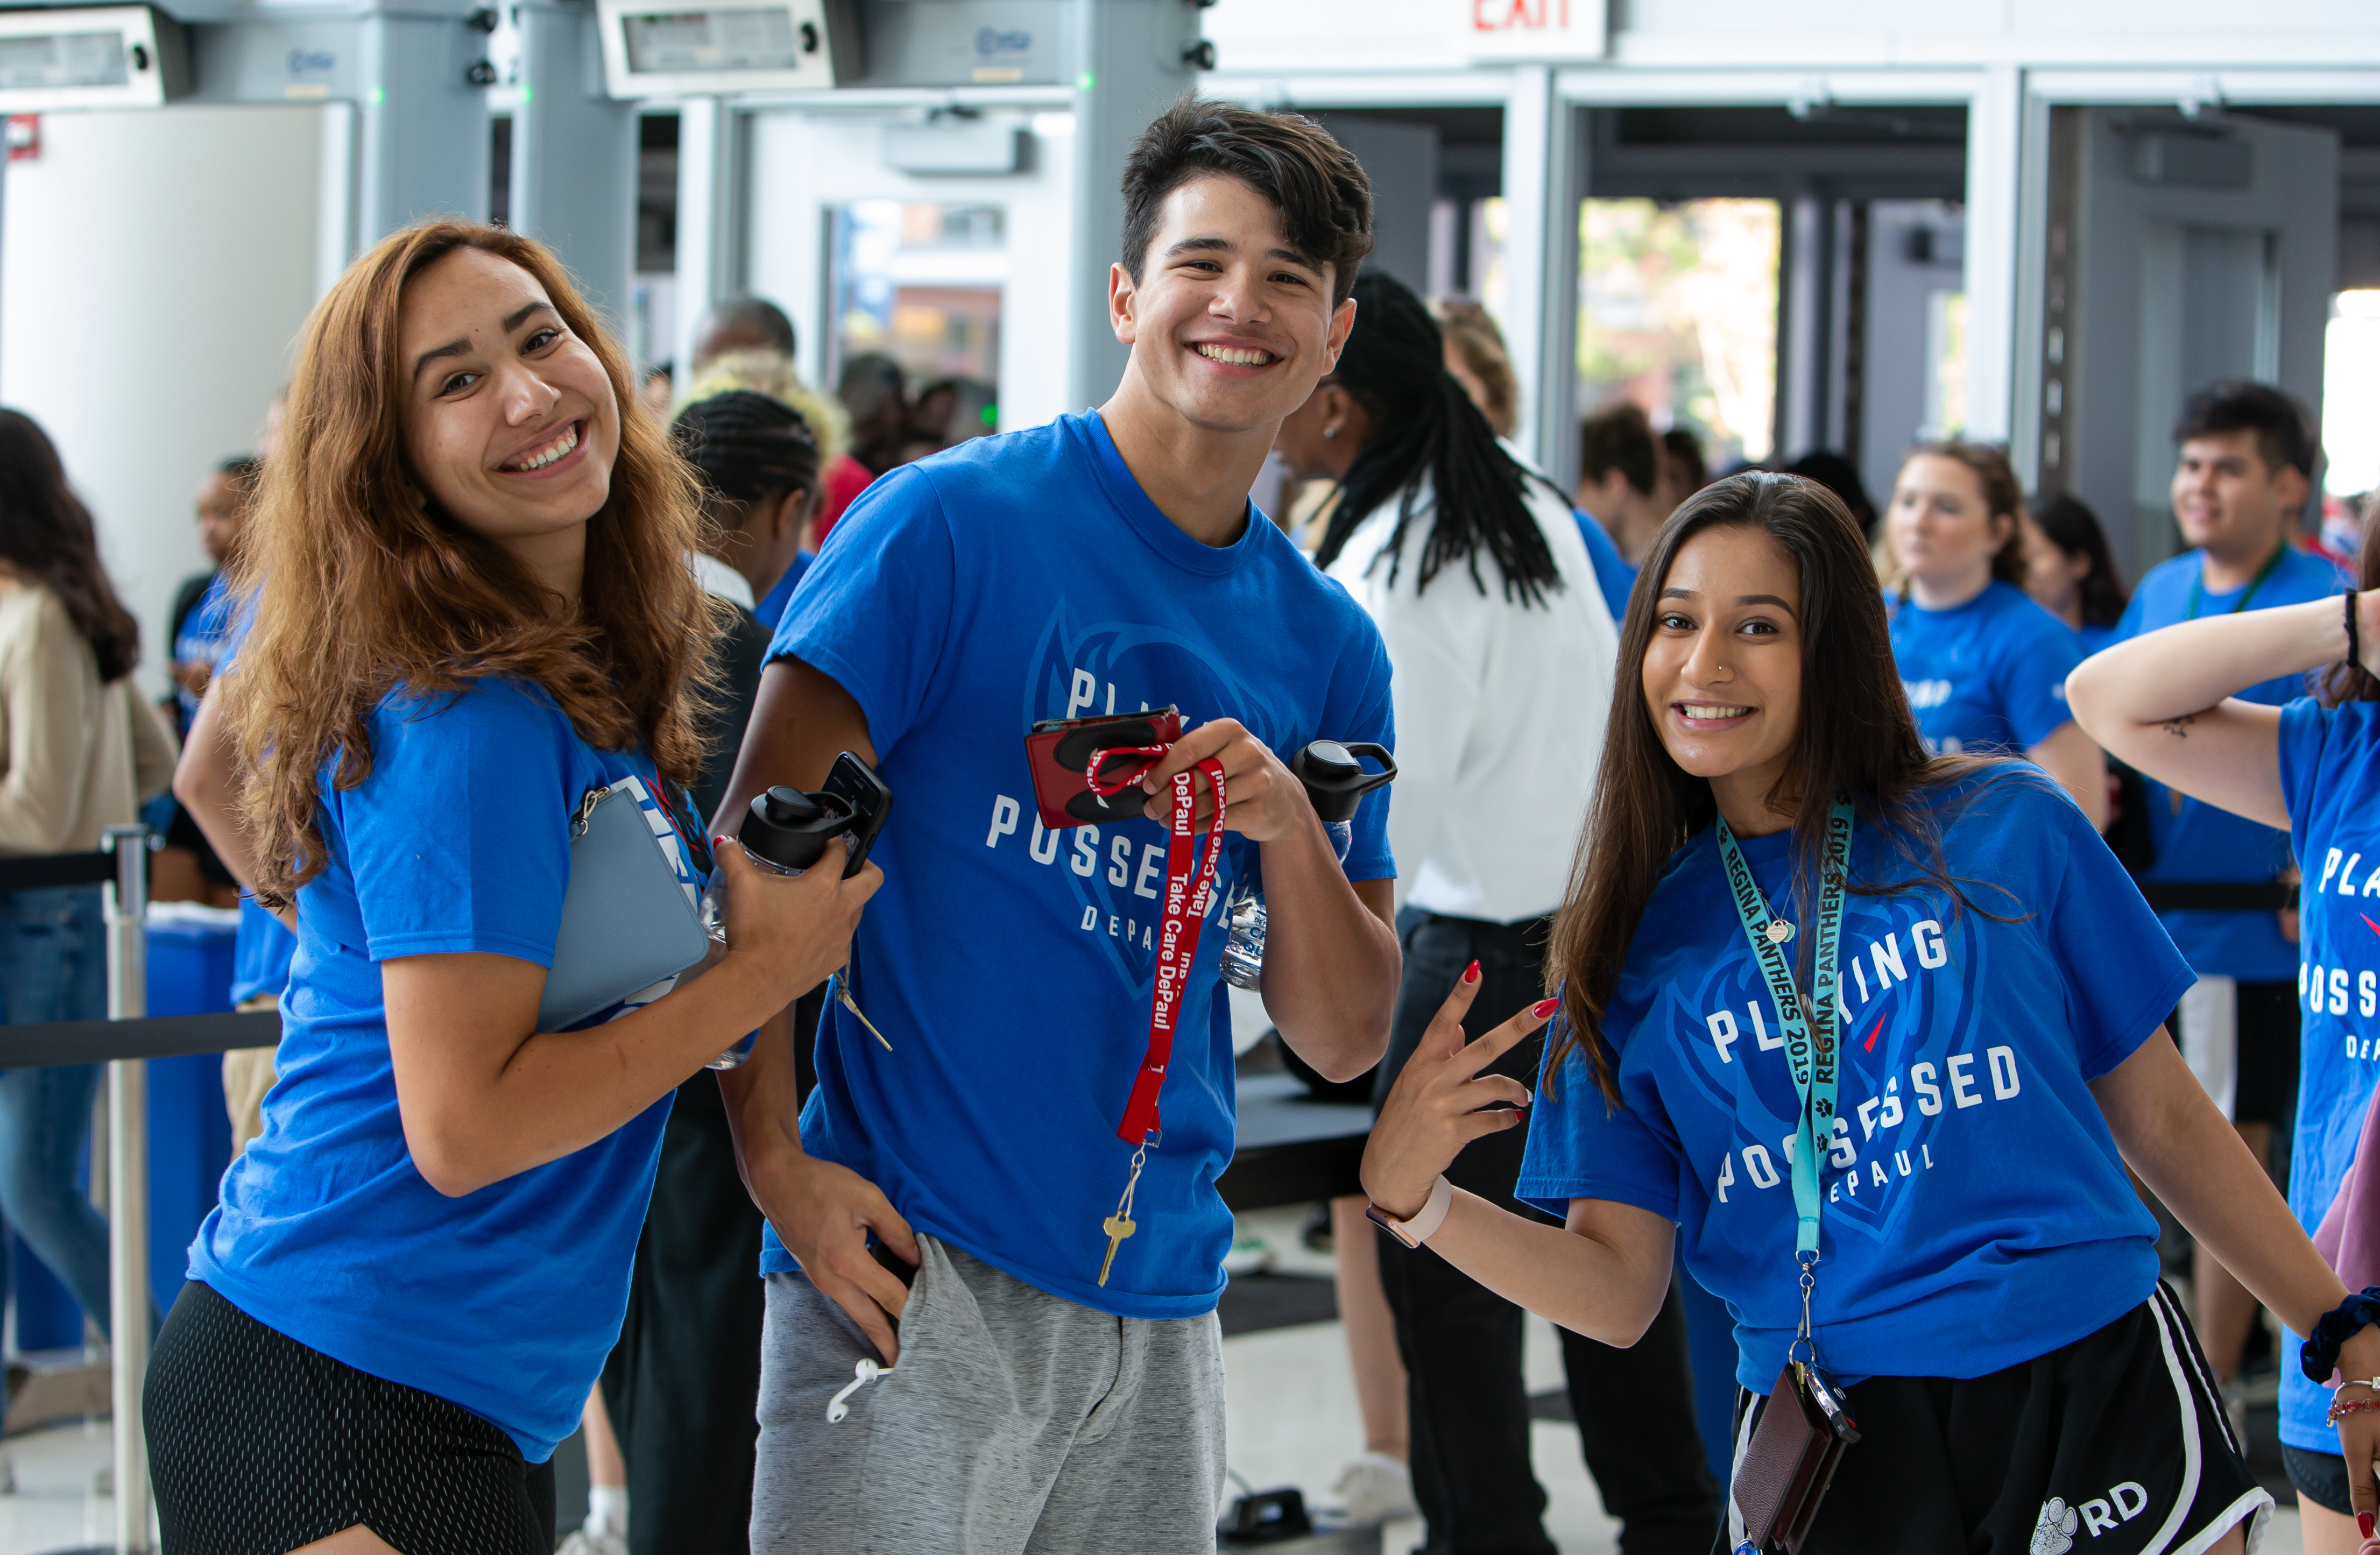 New DePaul students stop for a photo on their way in to Wintrust Arena for the first student convocation. (DePaul University/Randall Spriggs)